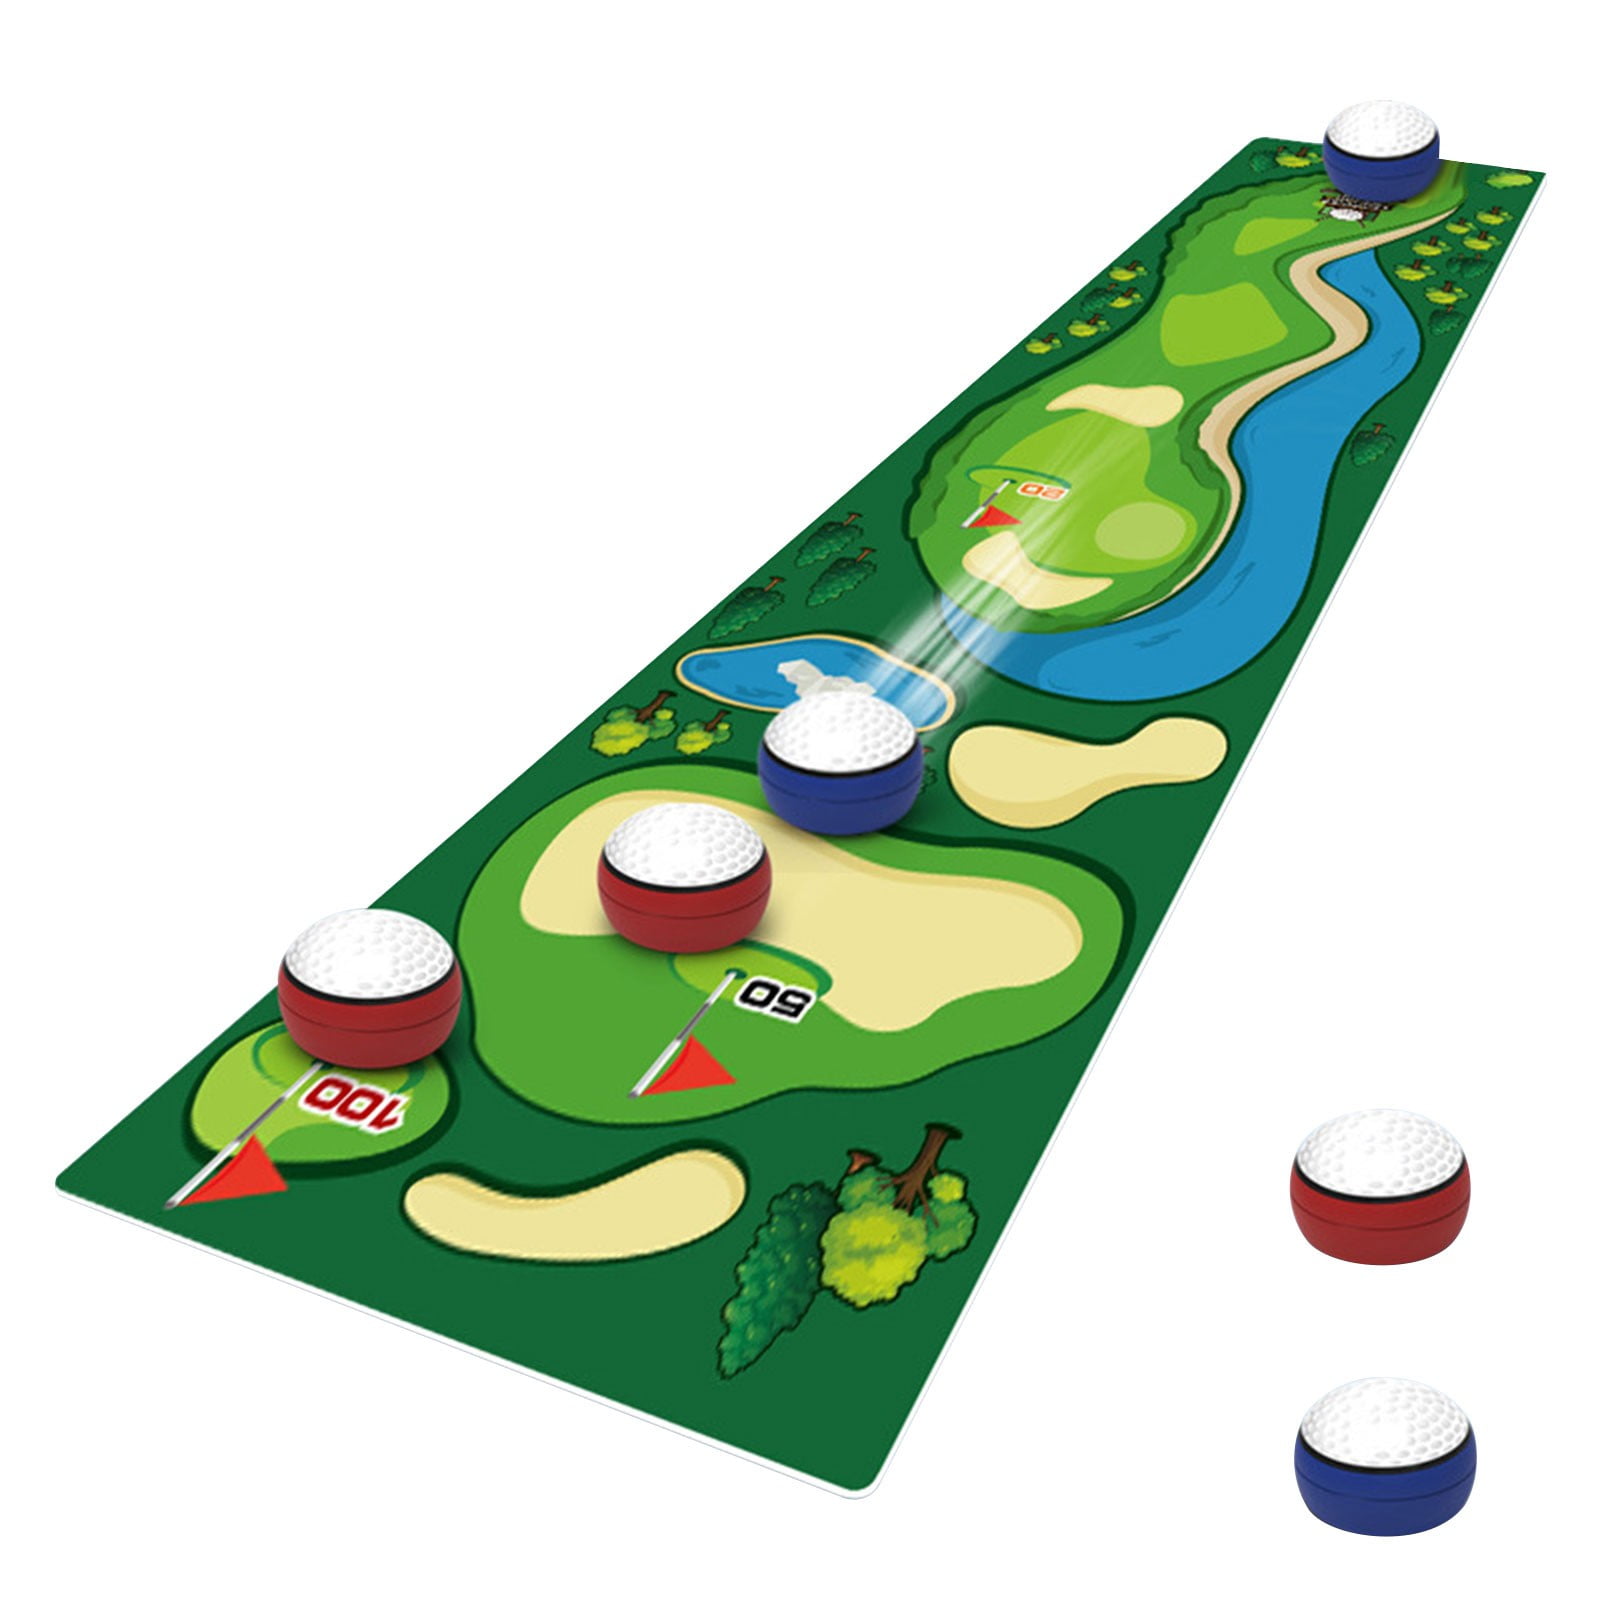 Herrnalise Tabletop Bowling Game for Kids, Adults & Family. Fun